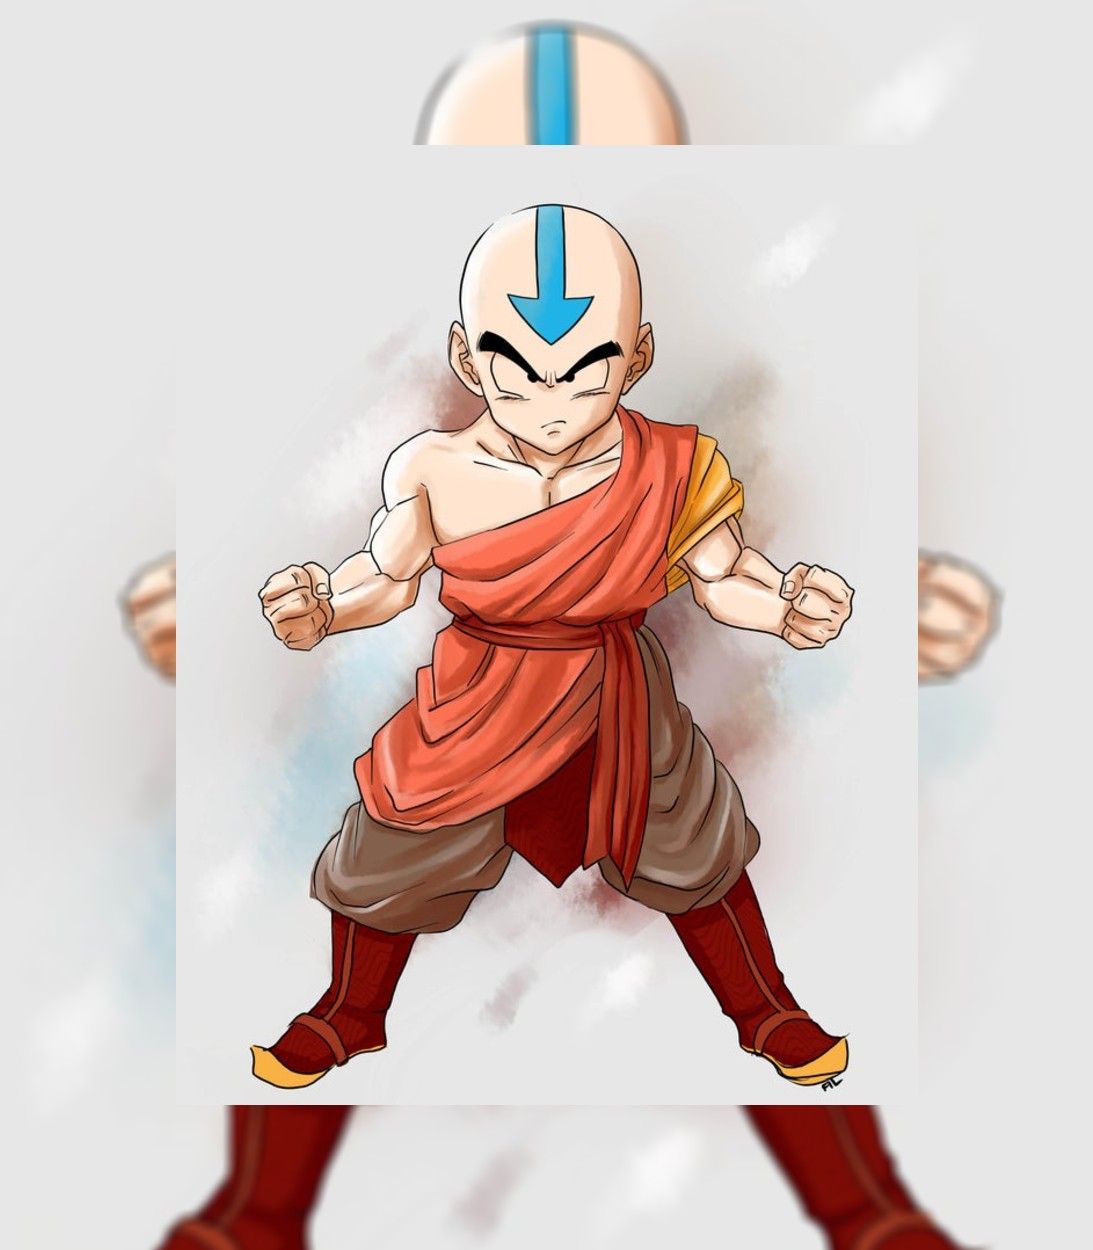 Krillin from Dragon Ball as Aang from Avatar The Last Airbender by filmememore VERTICAL